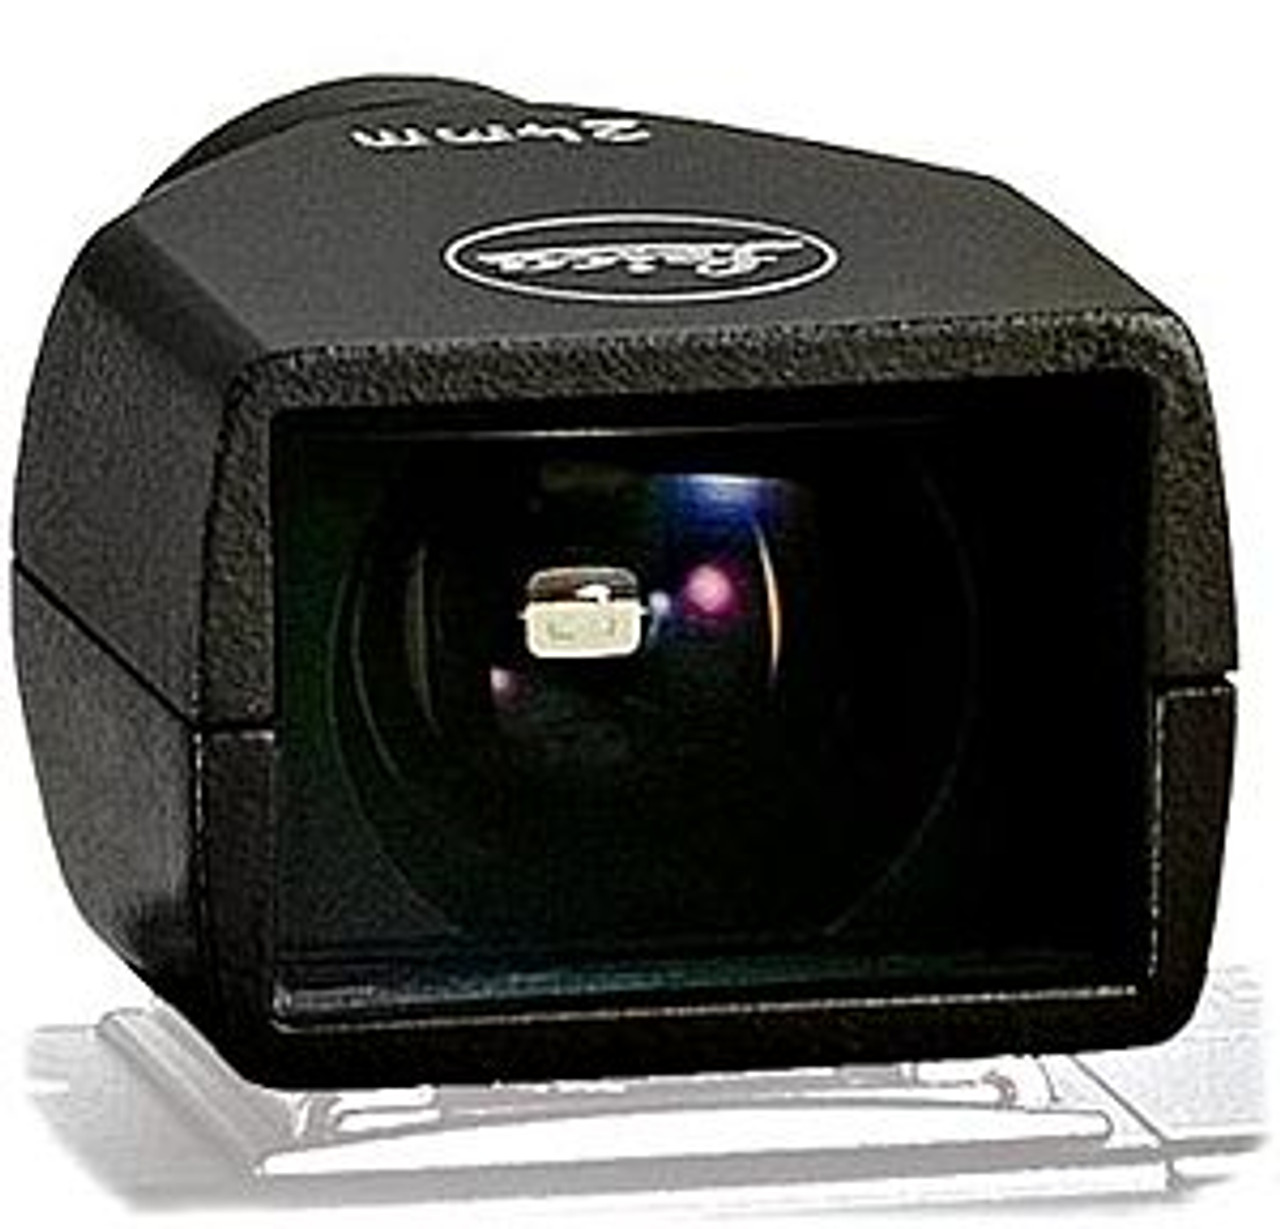 Brilliant Viewfinder For D-LUX 4